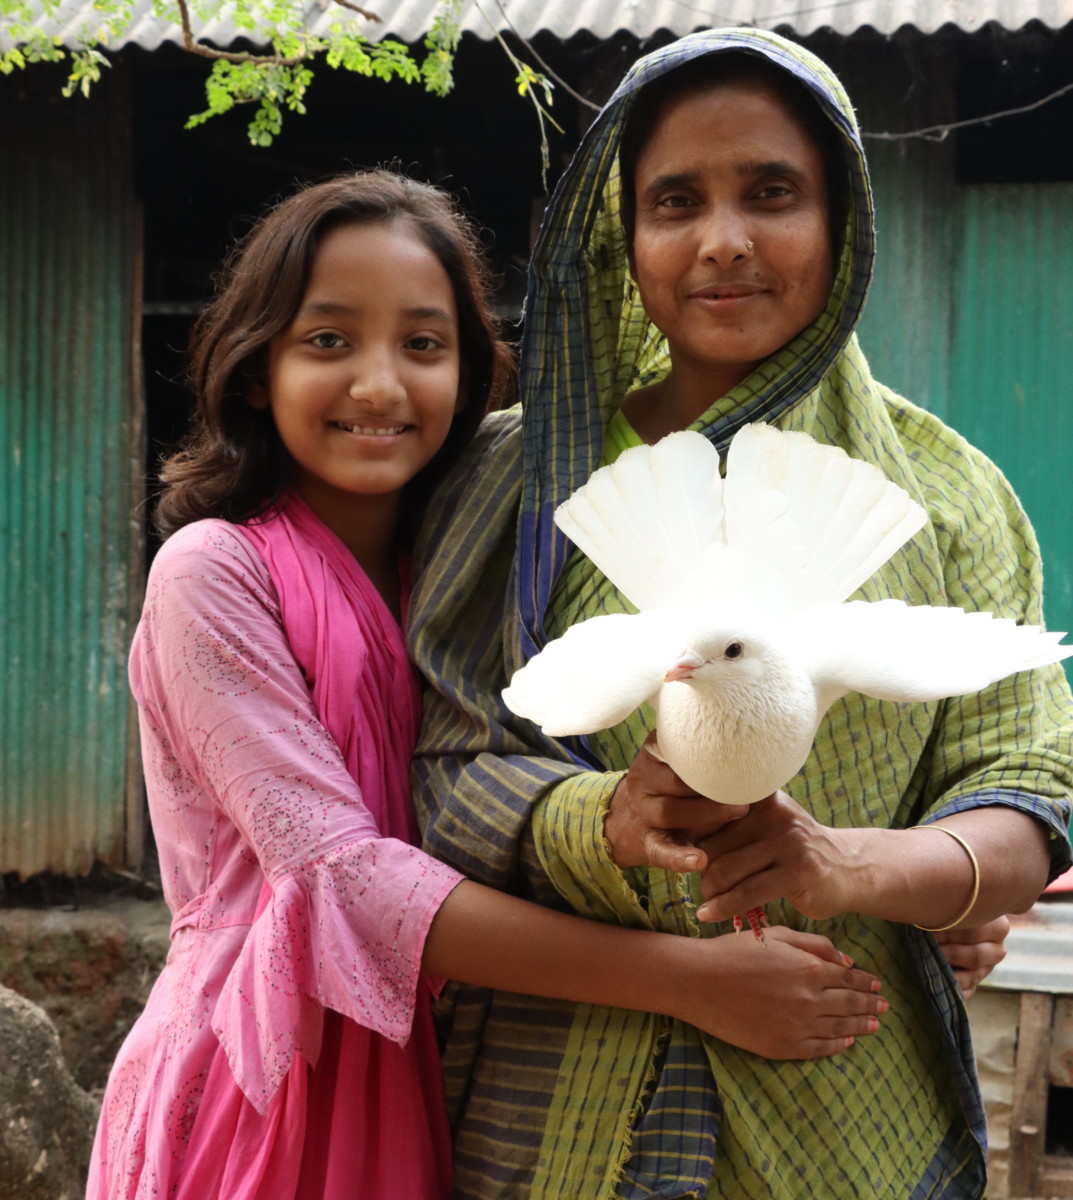 Bangladesh: Protecting Every Child’s Potential